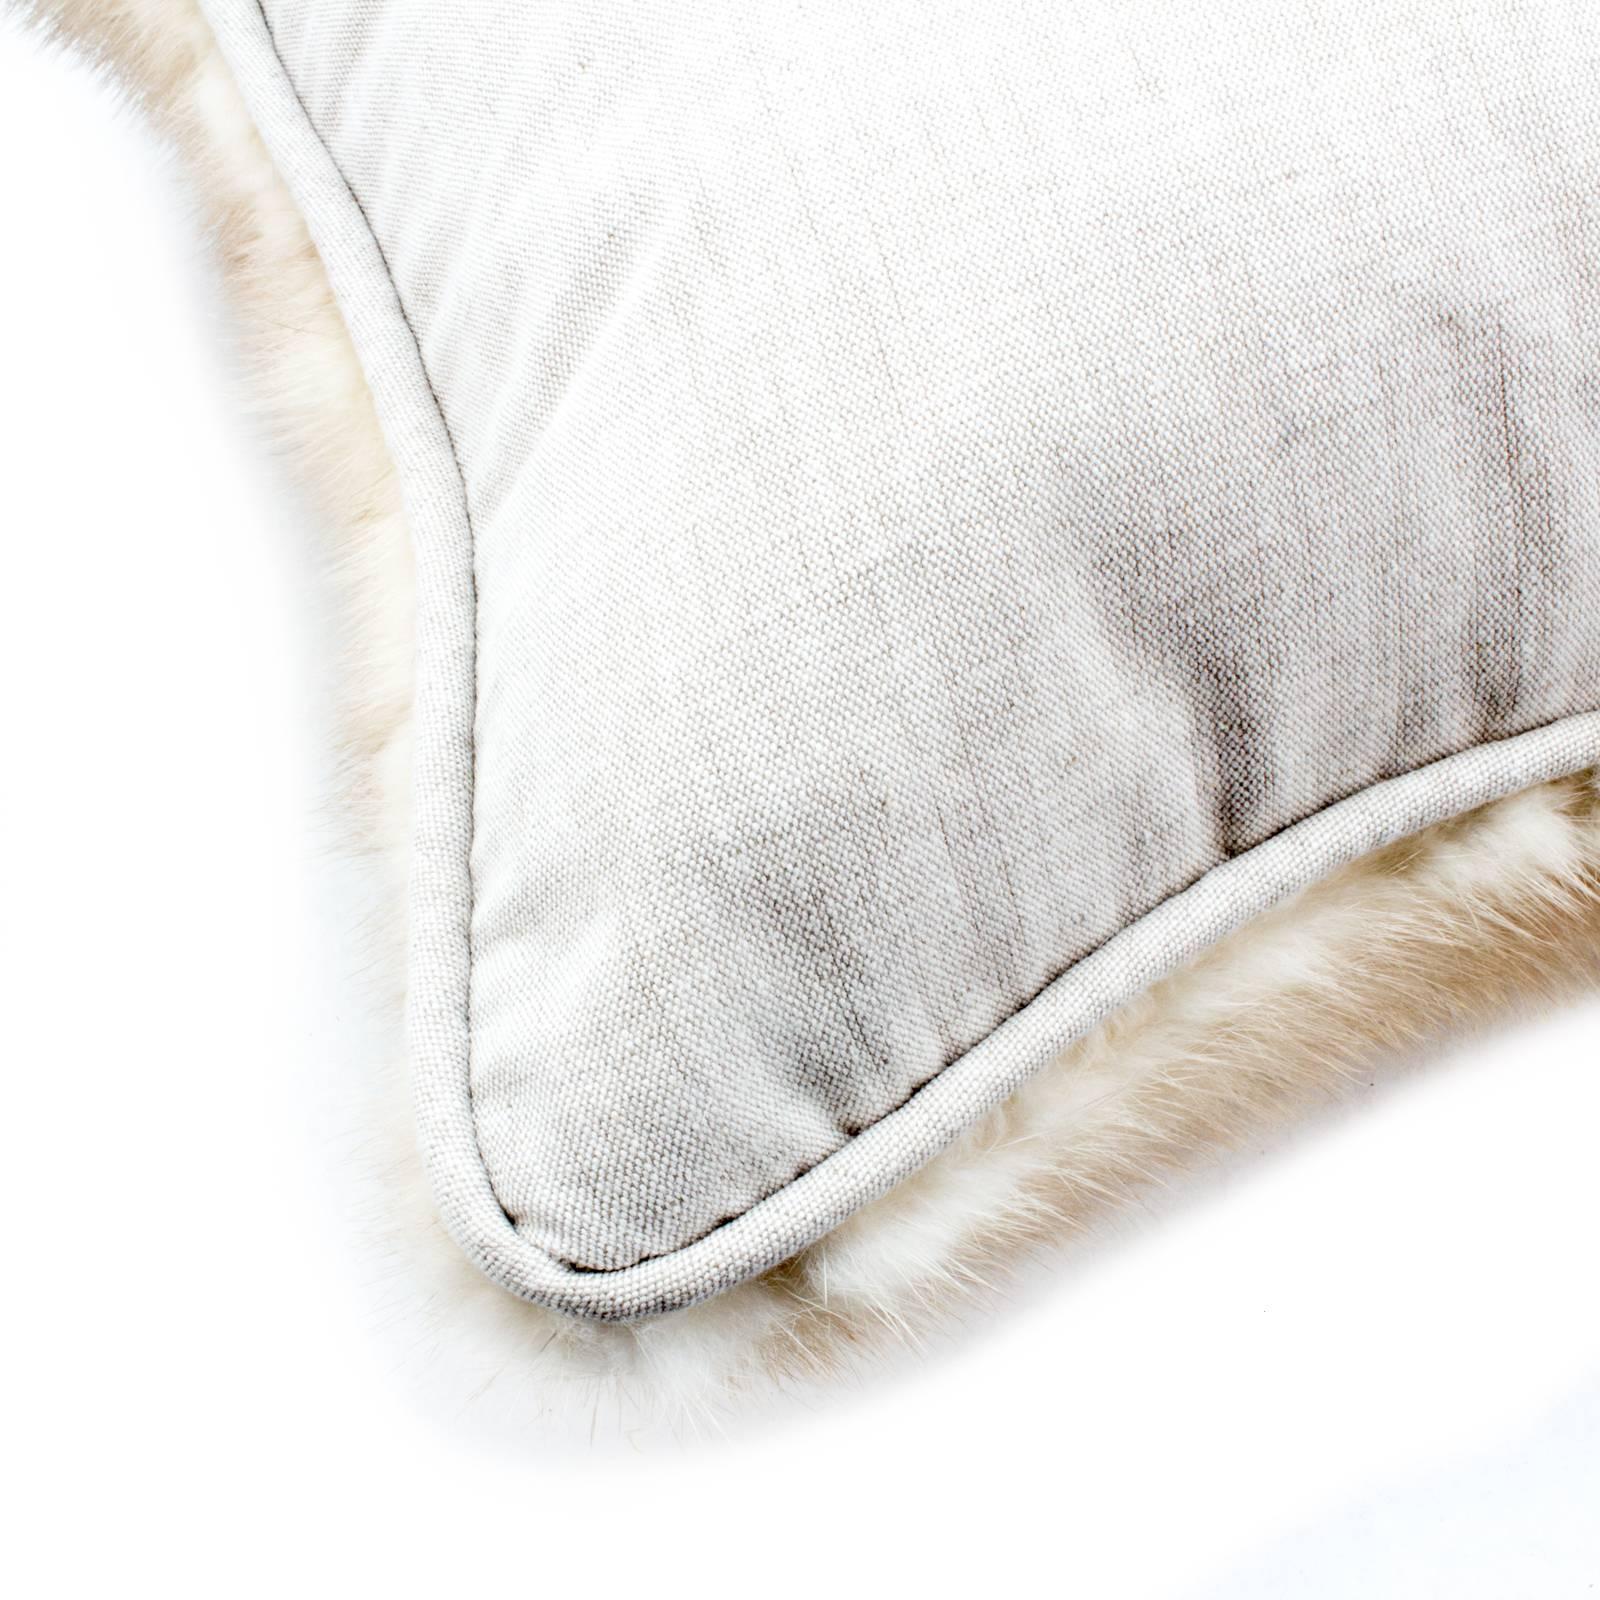 This luxurious vintage mink pillow is a lovely way of adding luxe texture to your living area. The blond coloring works well with neutral spaces, adding a touch of glamour with their soft texture. Just this one available.

Measures: 16